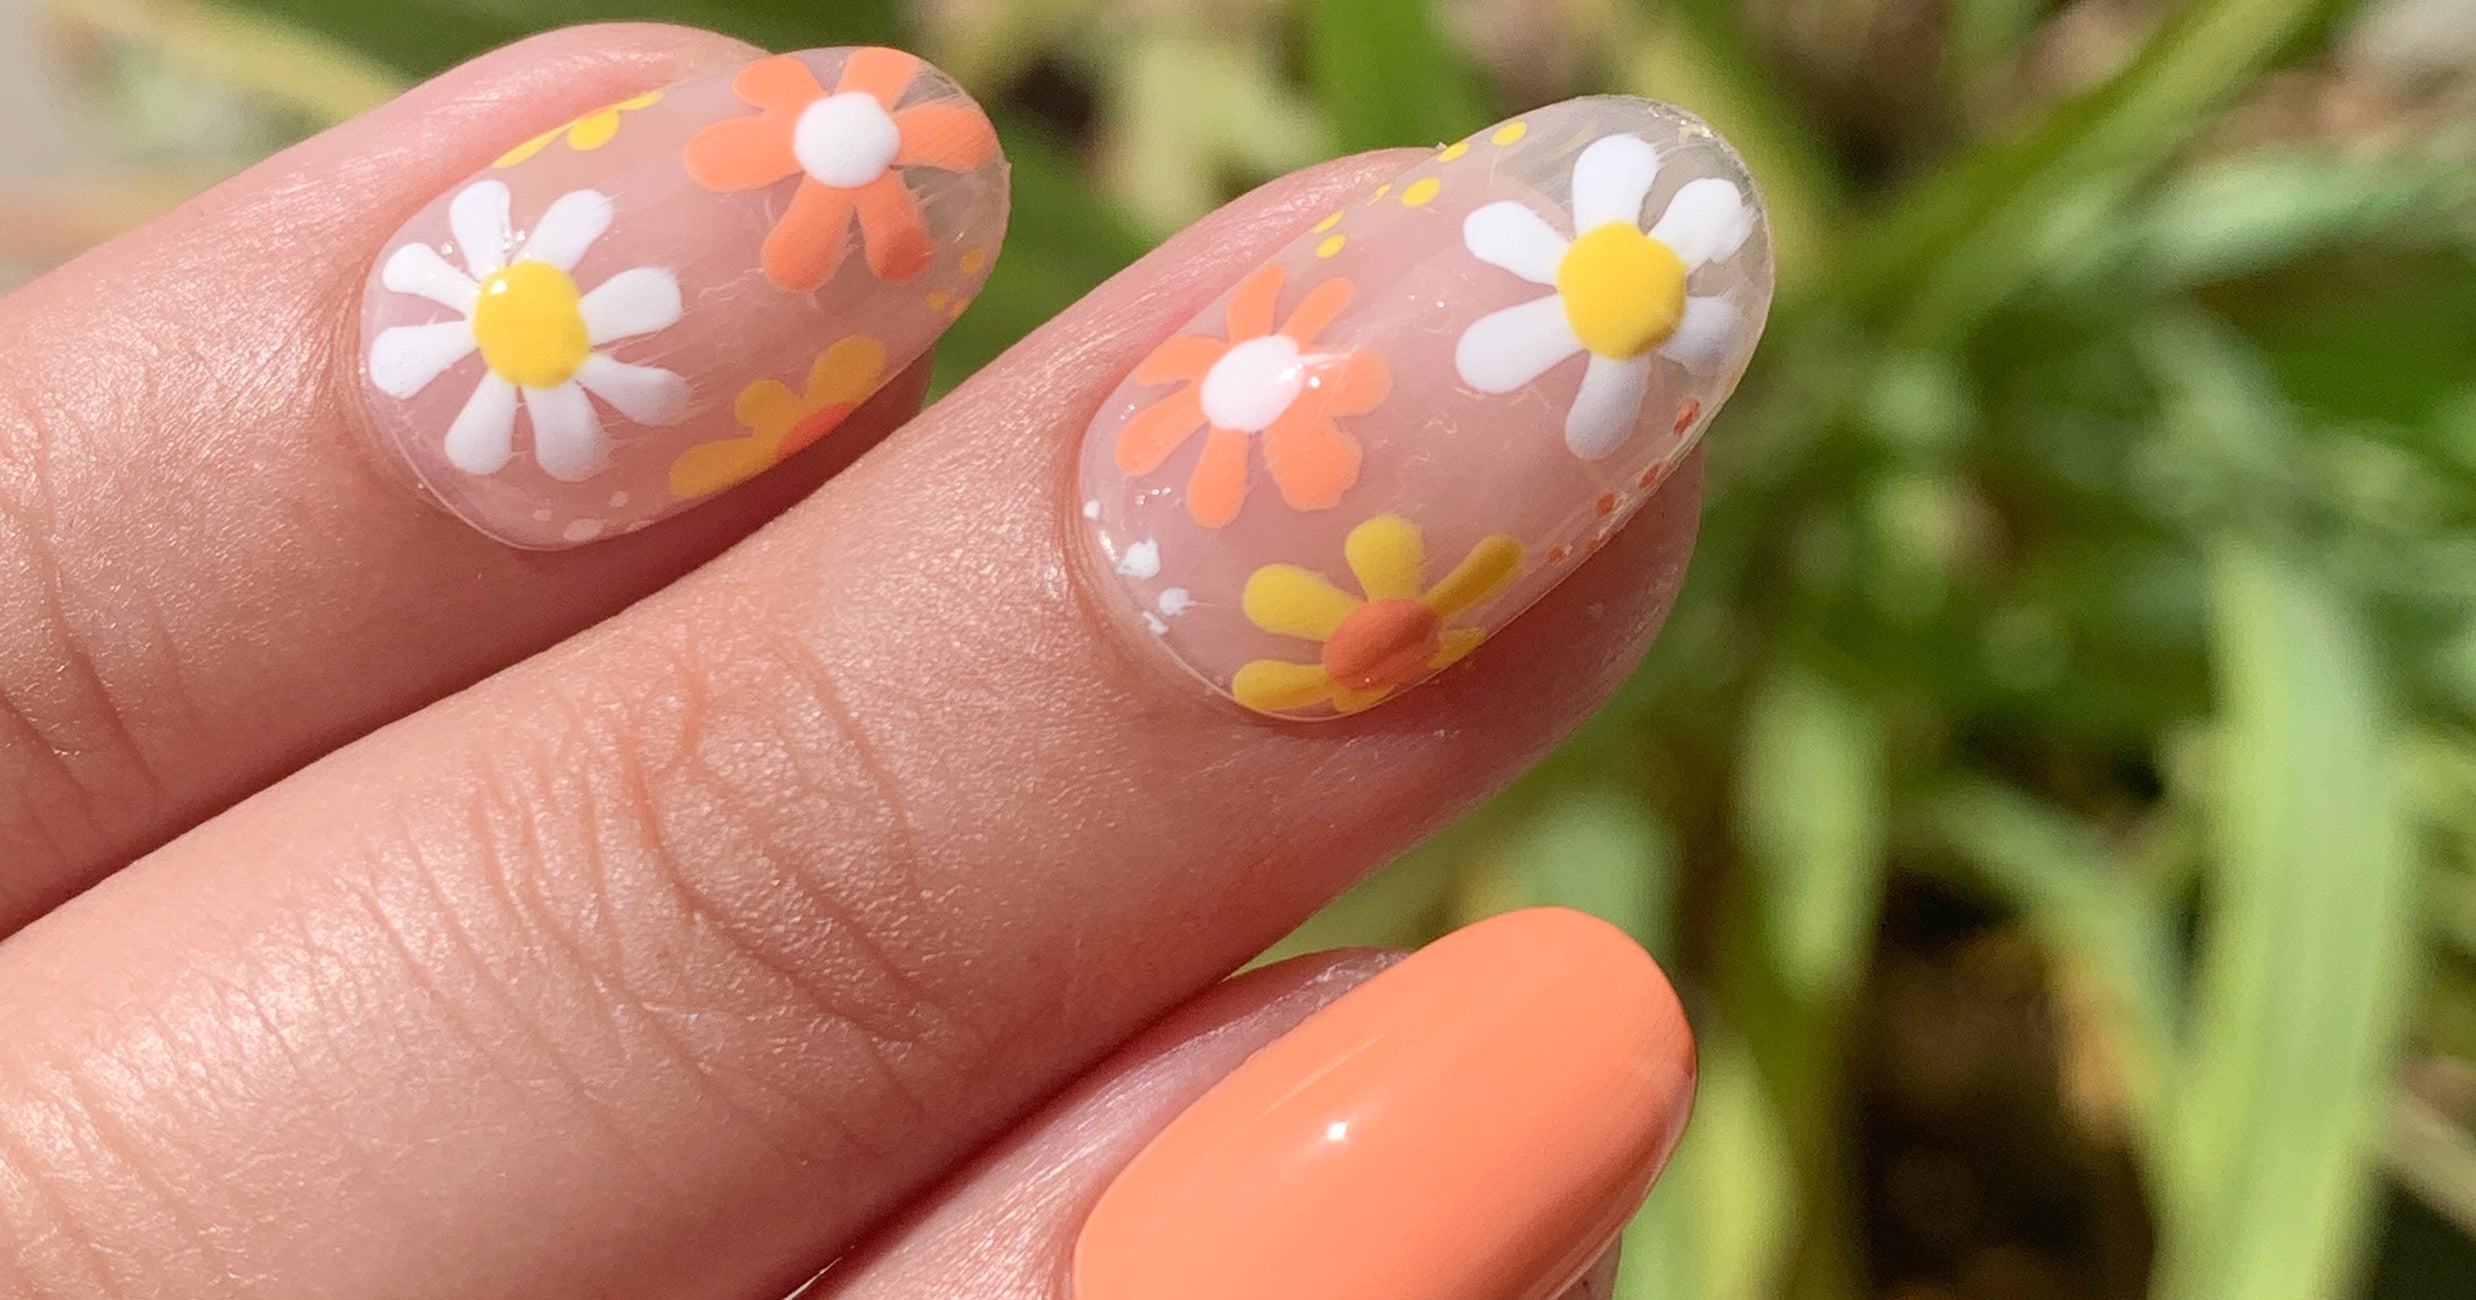 4. Nail Art Designs in Town and Country - wide 9